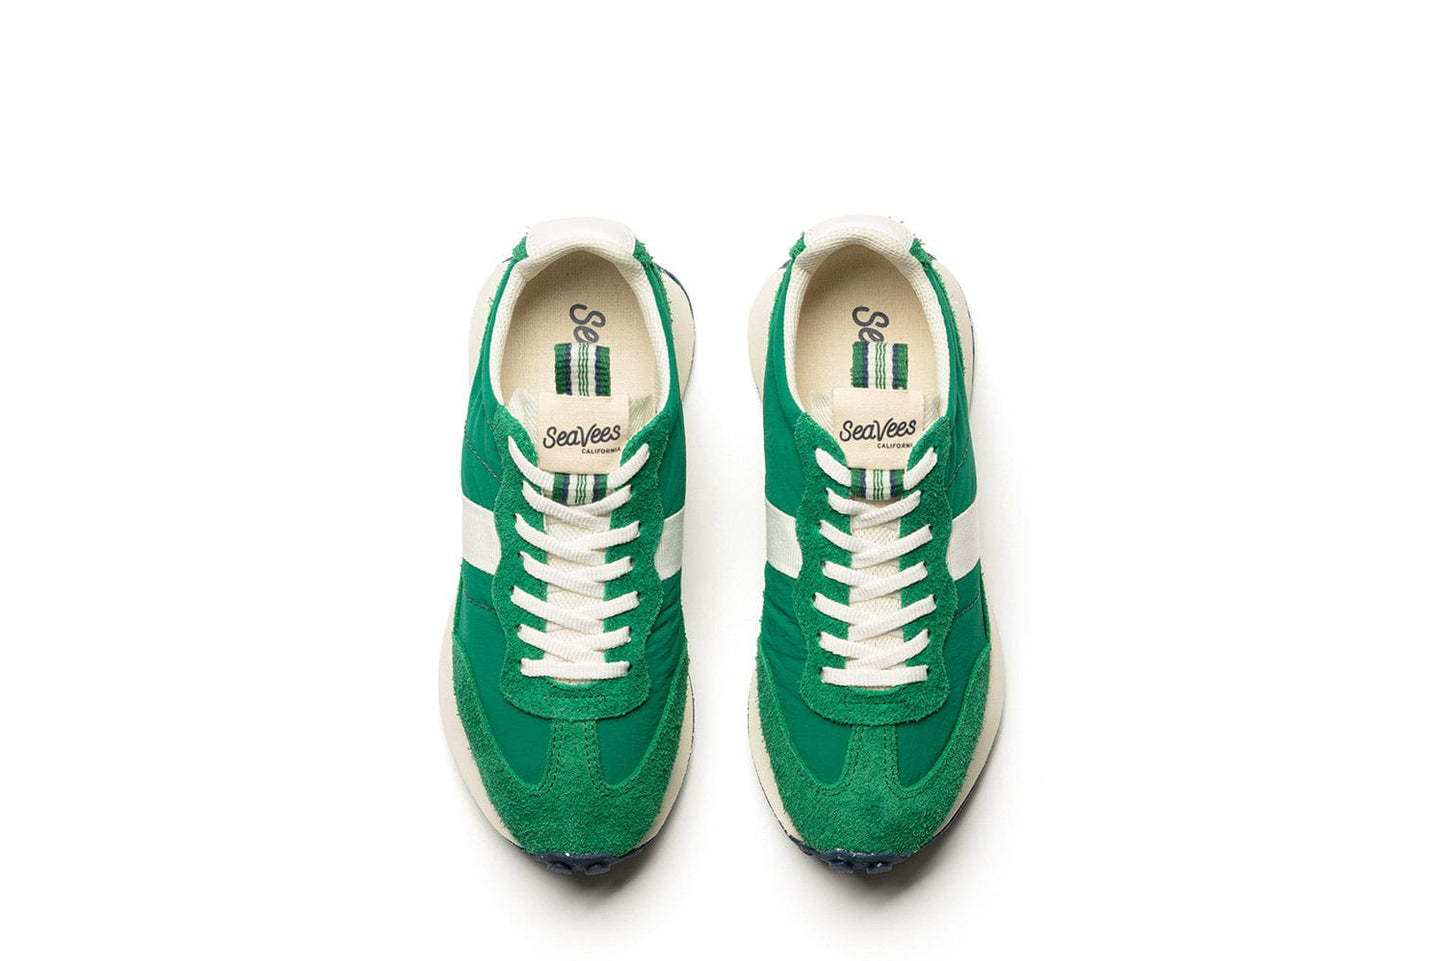 Top-down view of the Acorn Trainer in the color Grass Green, showcasing the white laces, branding, and pull tab.